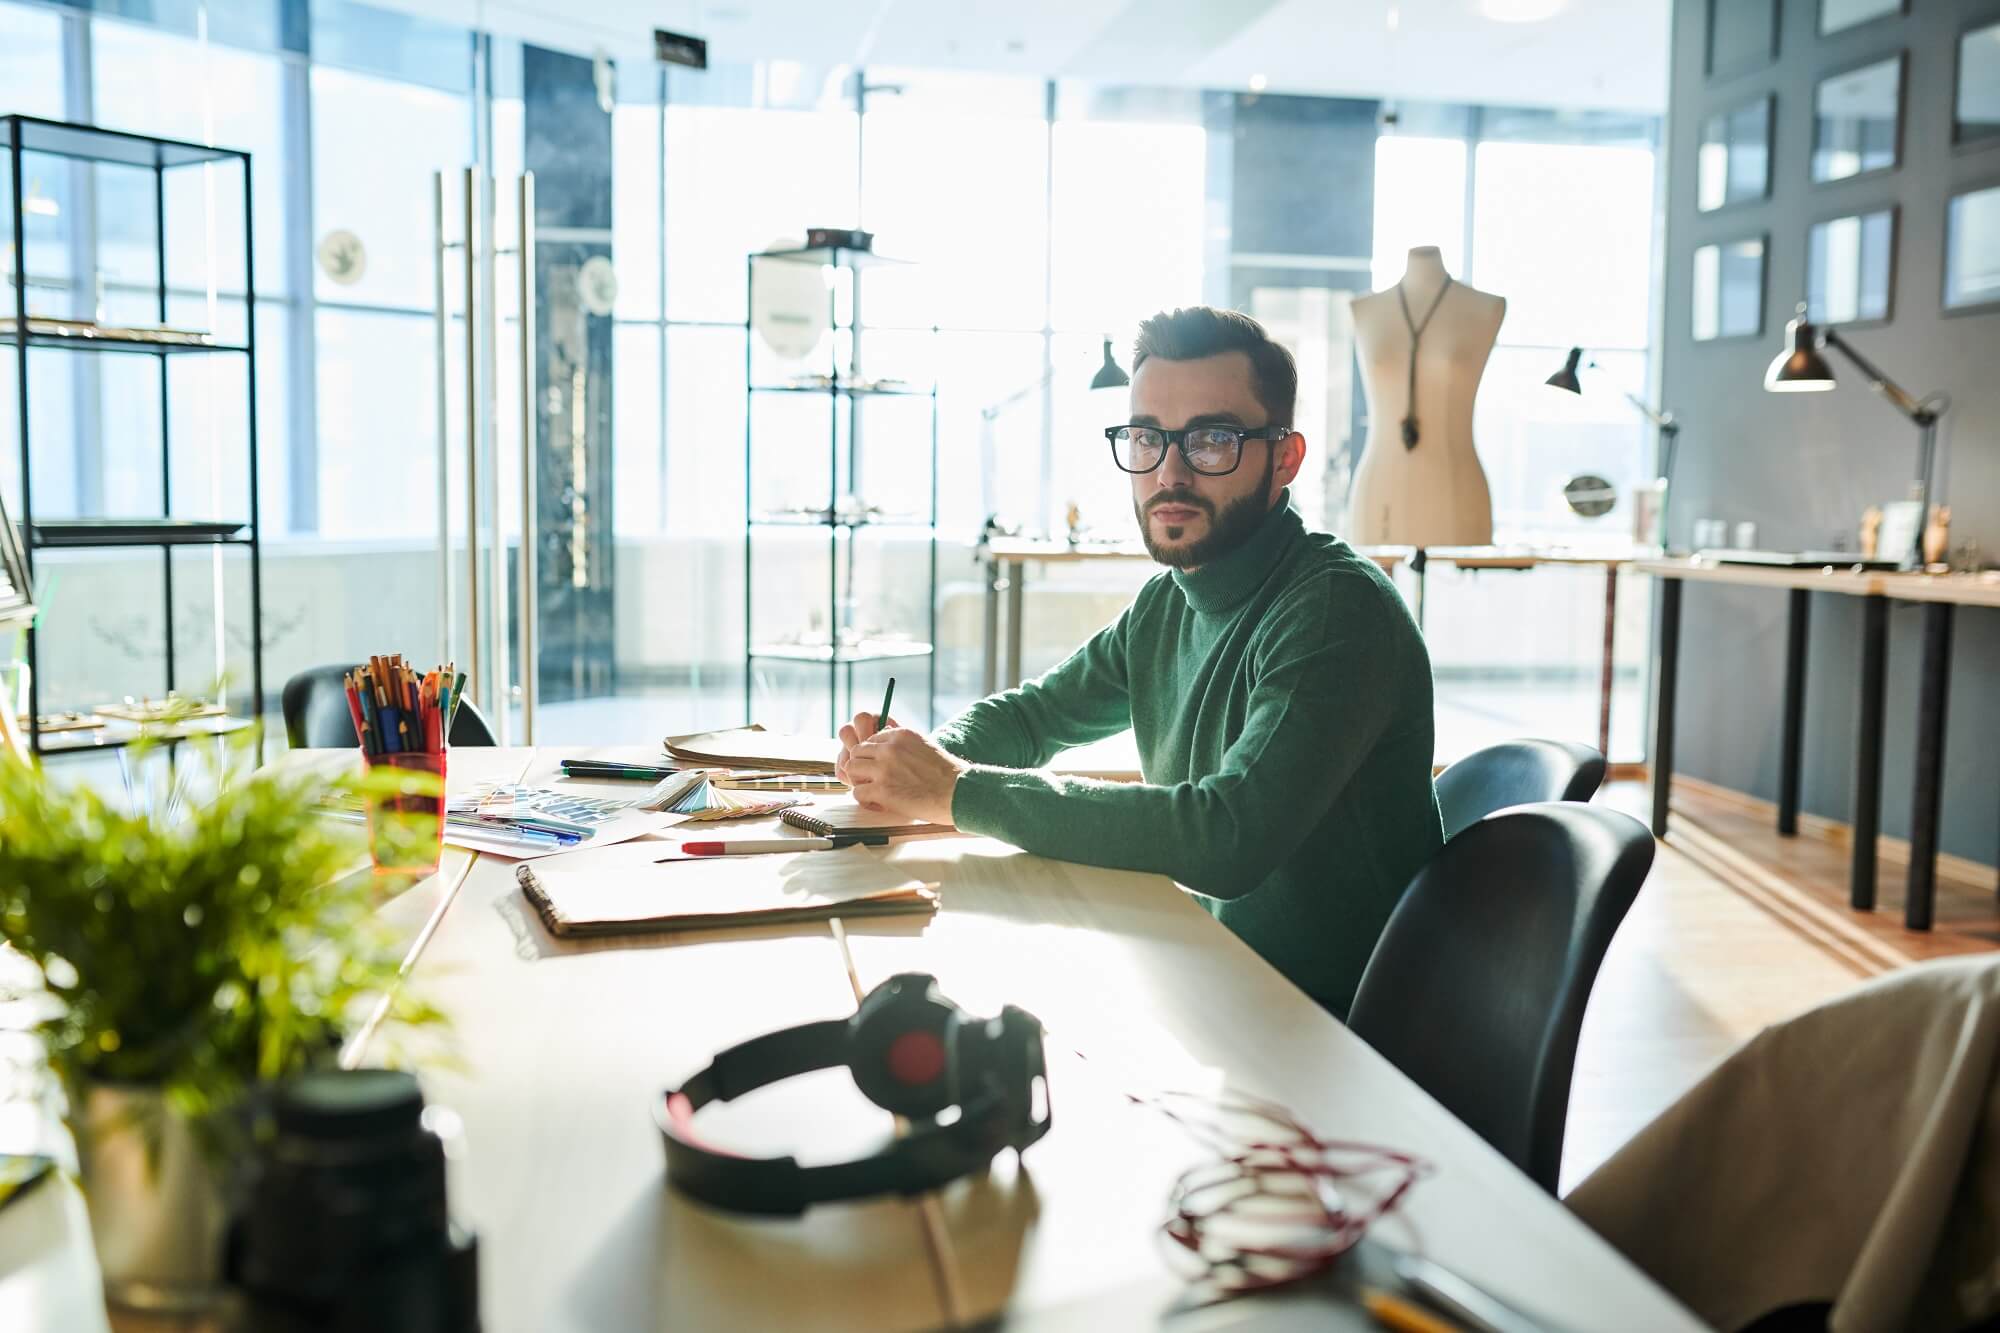  designer looking at camera while sitting about reinventing design